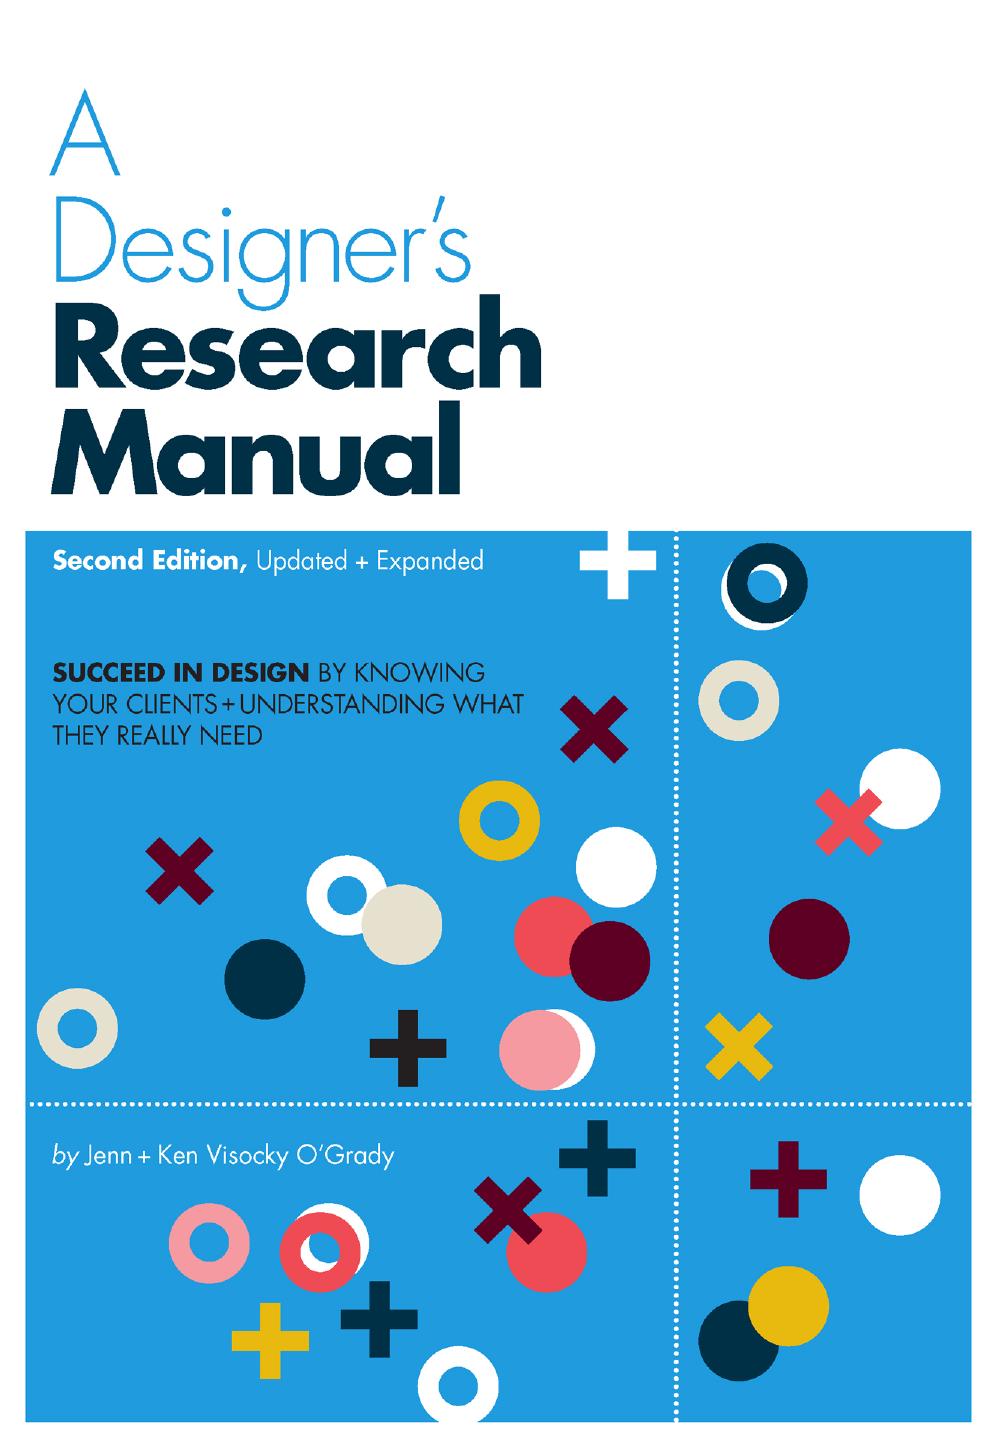 A Designer's Research Manual, 2nd edition, Updated and Expanded by Jenn Visocky O'Grady and Ken Visocky O'Grady